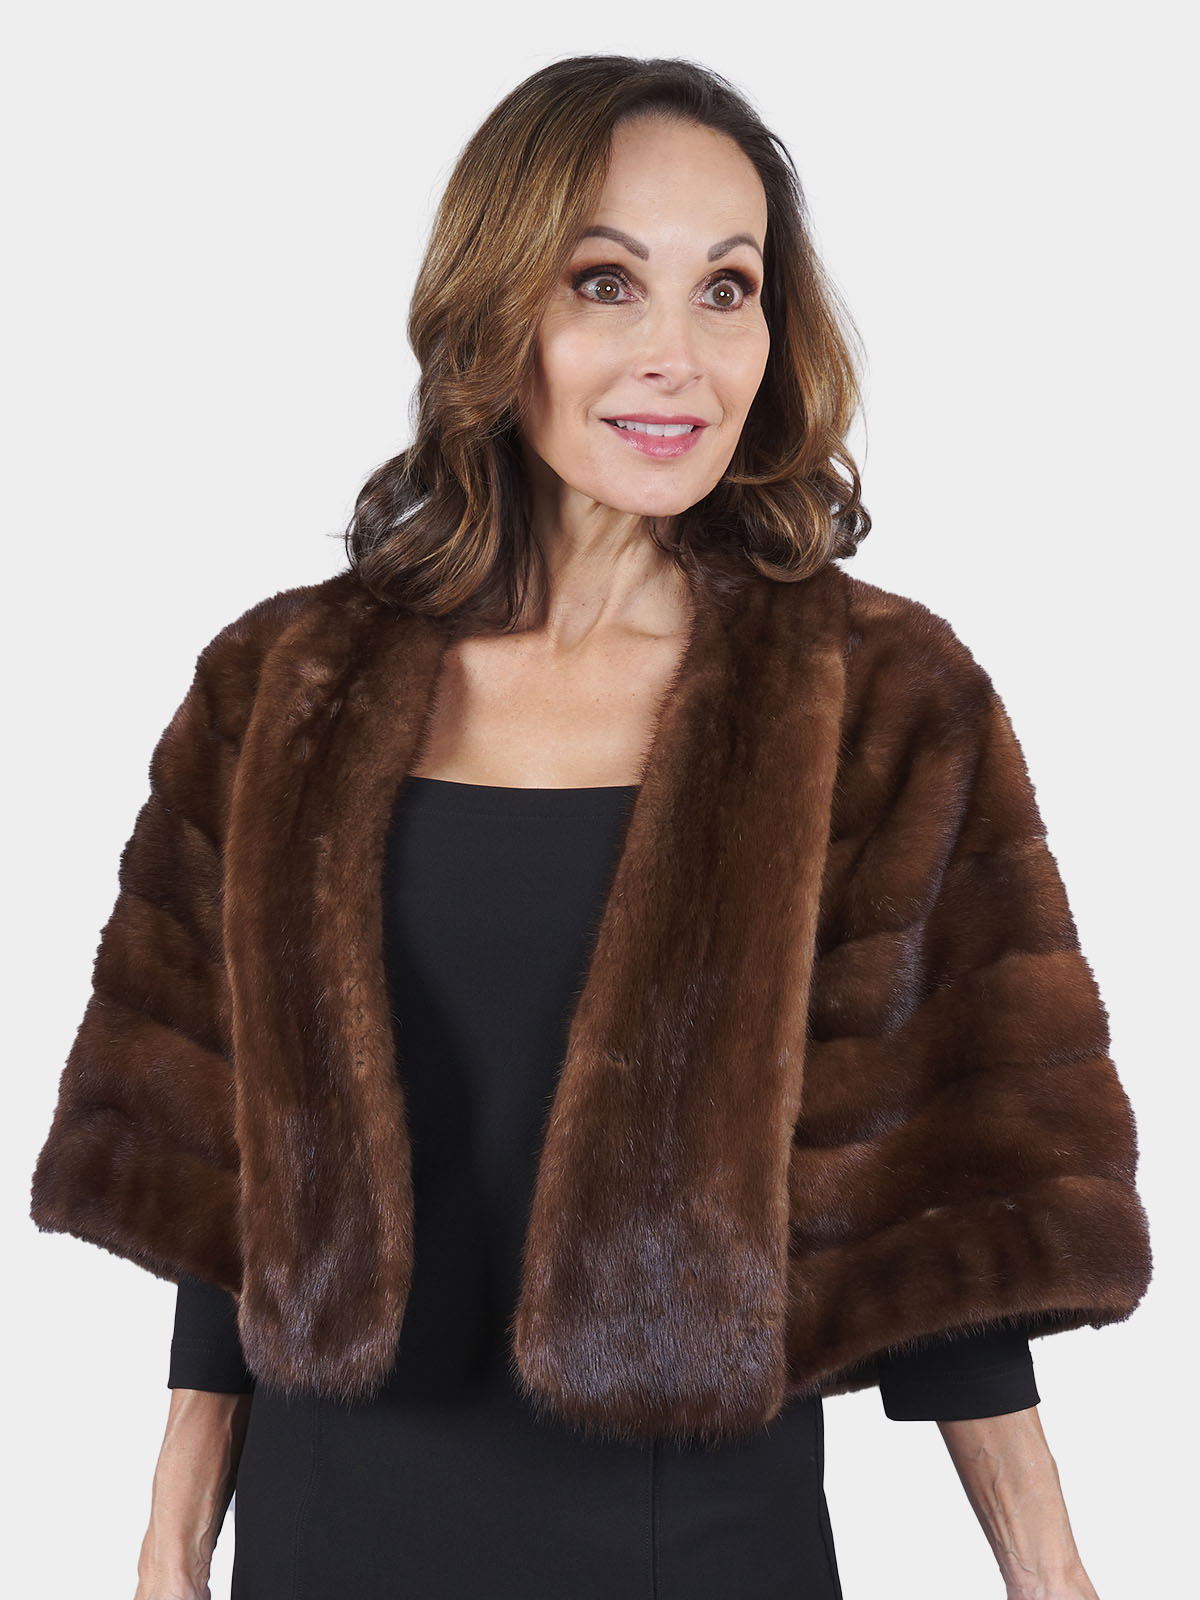 Queenshiny Womens Knitted Mink Fur Stole Cape